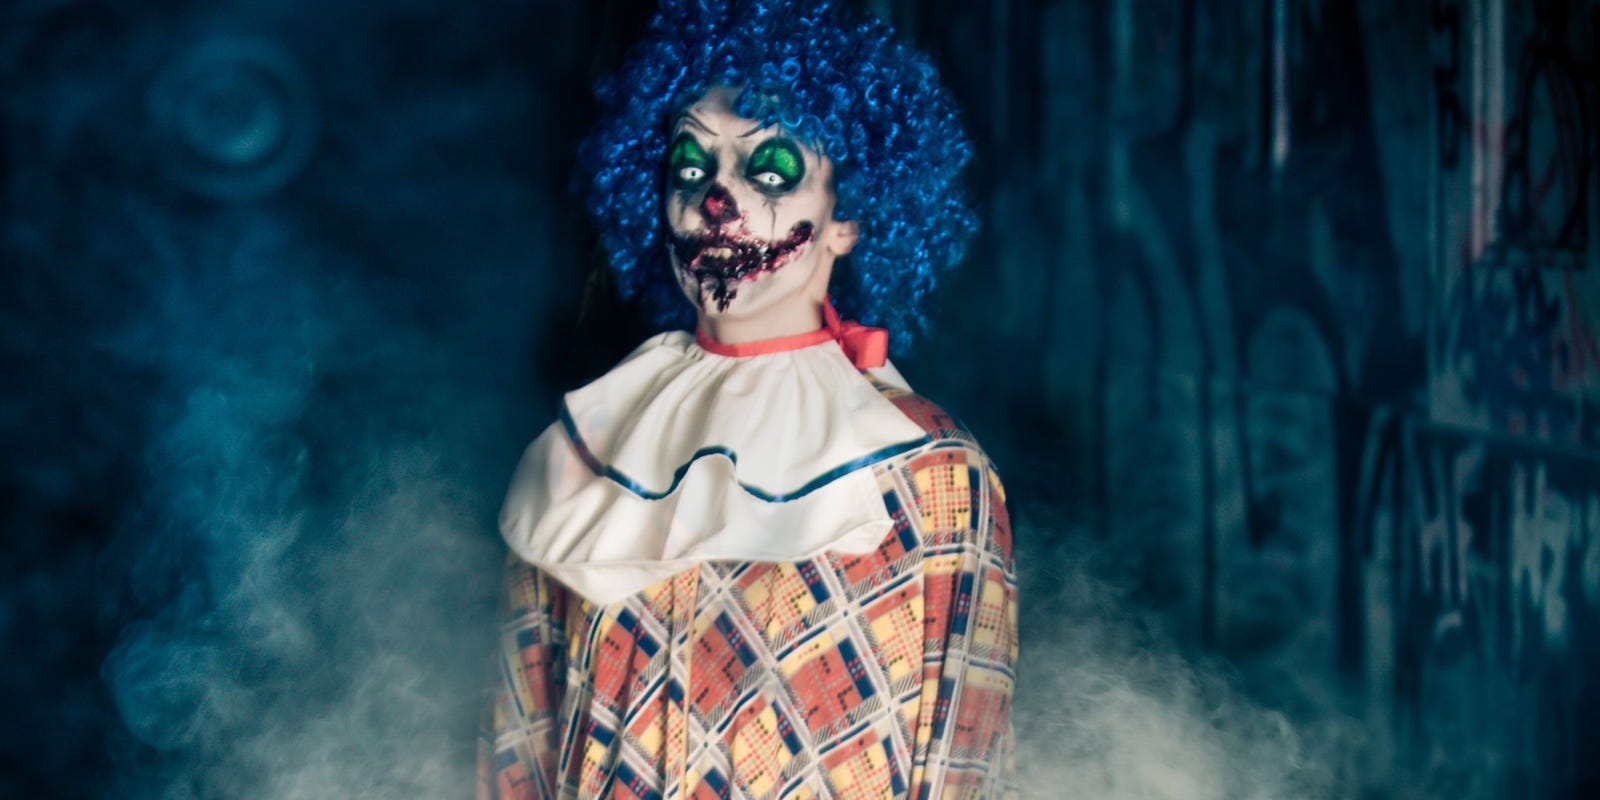 There were murderous clowns before 2016? Delve into the odd true crime